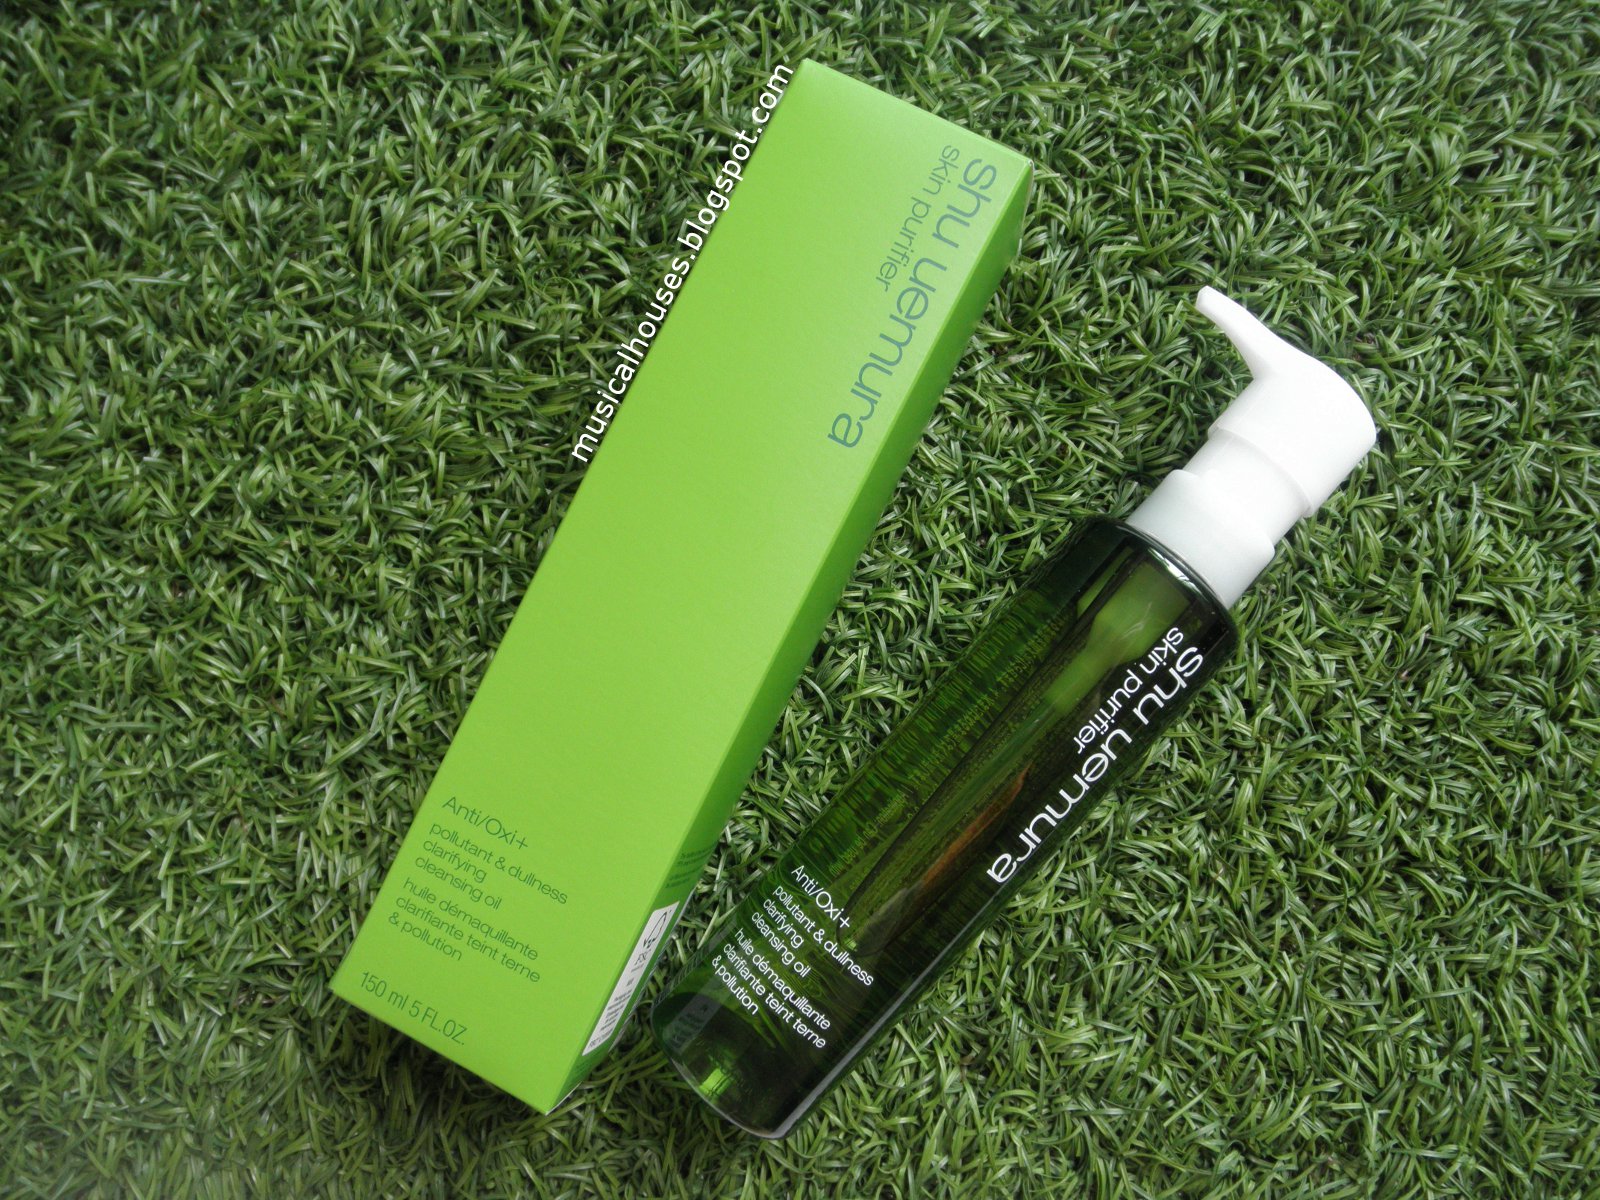 Shu Uemura Anti/Oxi+ Cleansing Oil Review and Ingredients Analysis